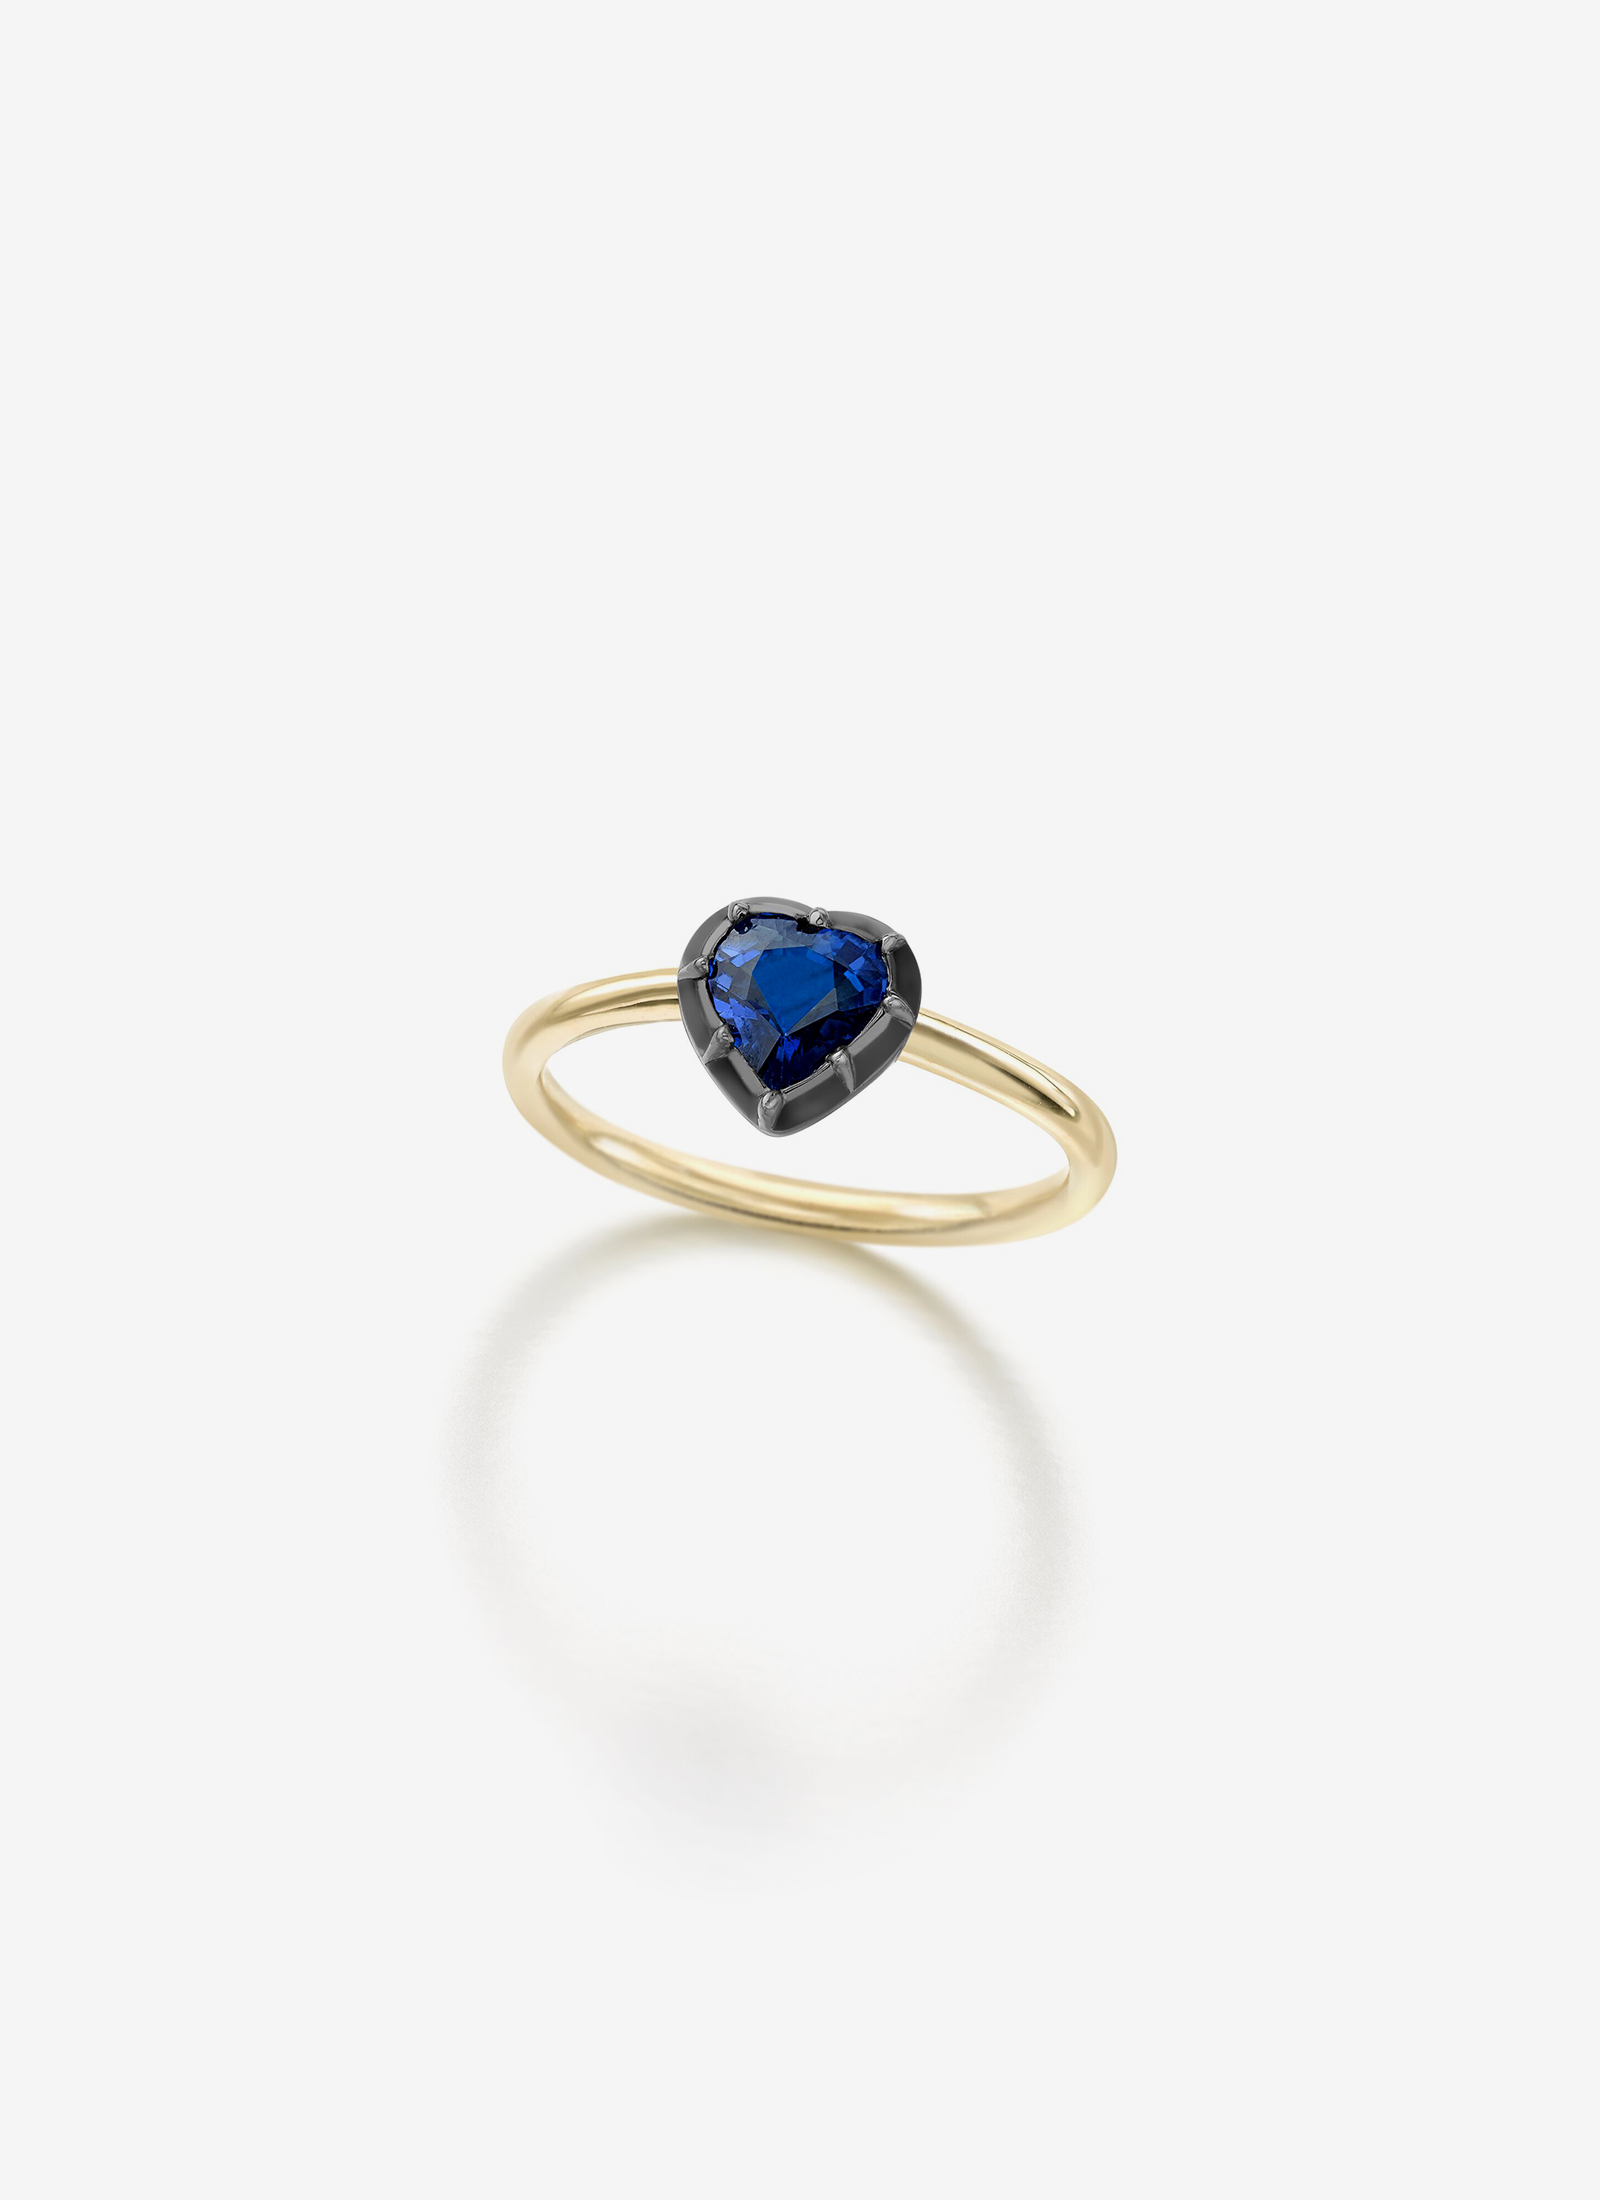 Button Back Sapphire Ring - Heart Shaped 0.98ct